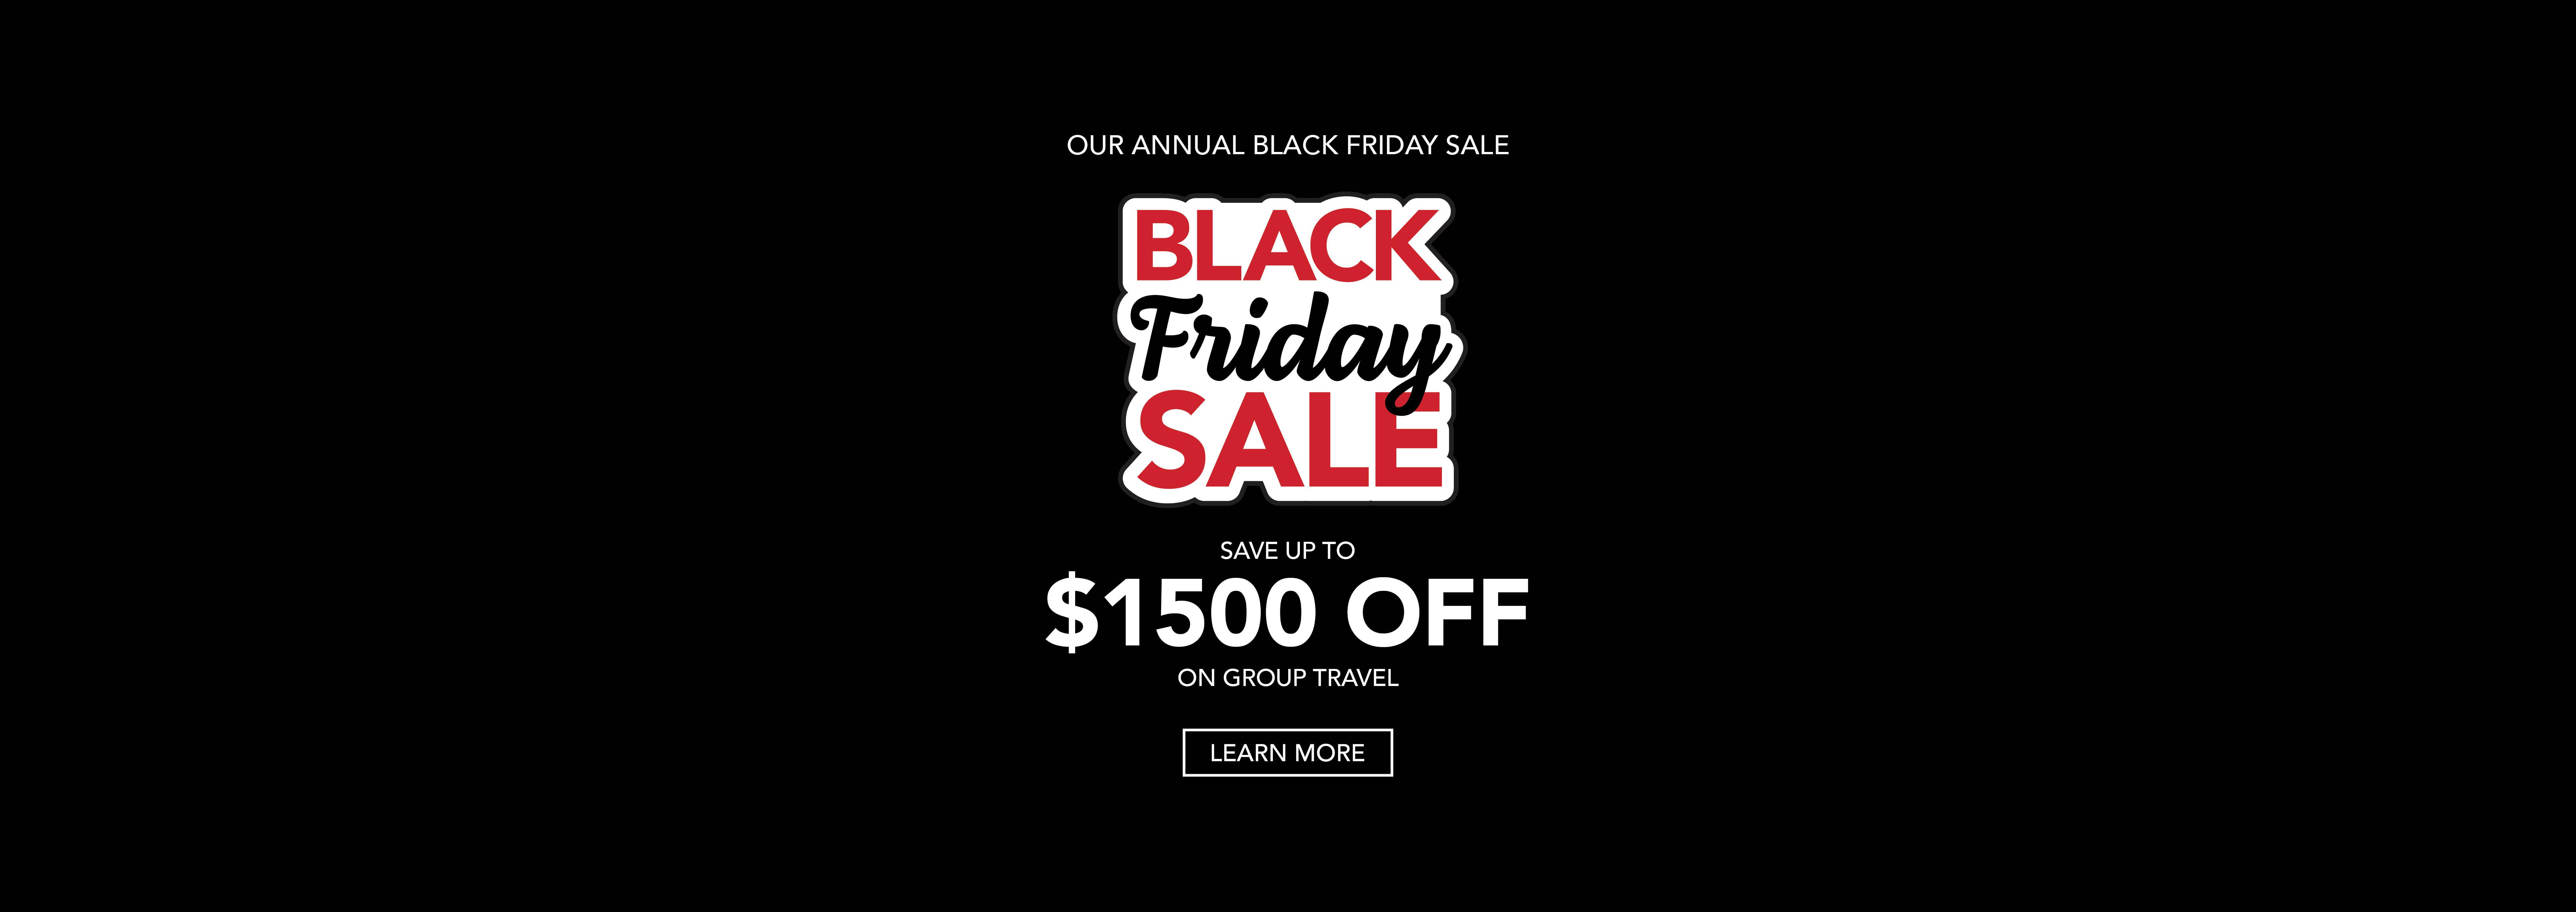 Black Friday Sale - Save up to $1500 on group travel